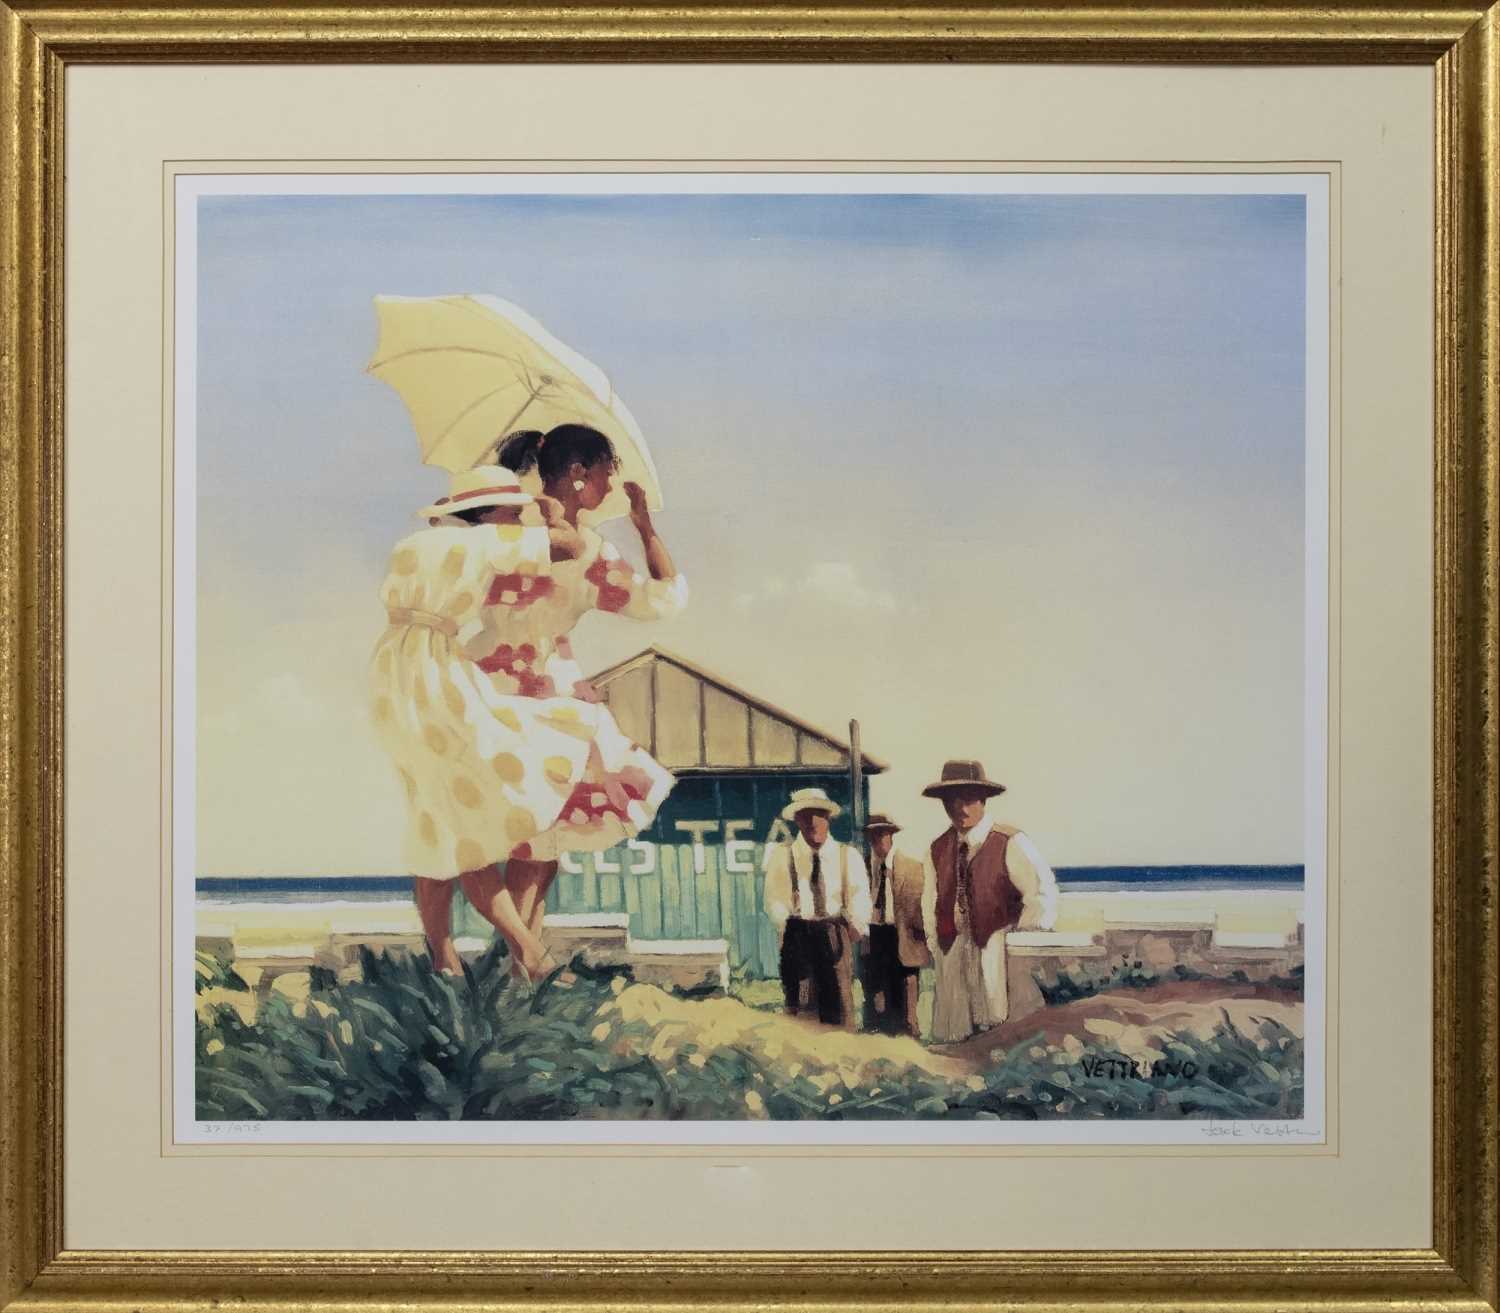 Lot 88 - A VERY DANGEROUS BEACH, A SIGNED LITHOGRAPH BY JACK VETTRIANO